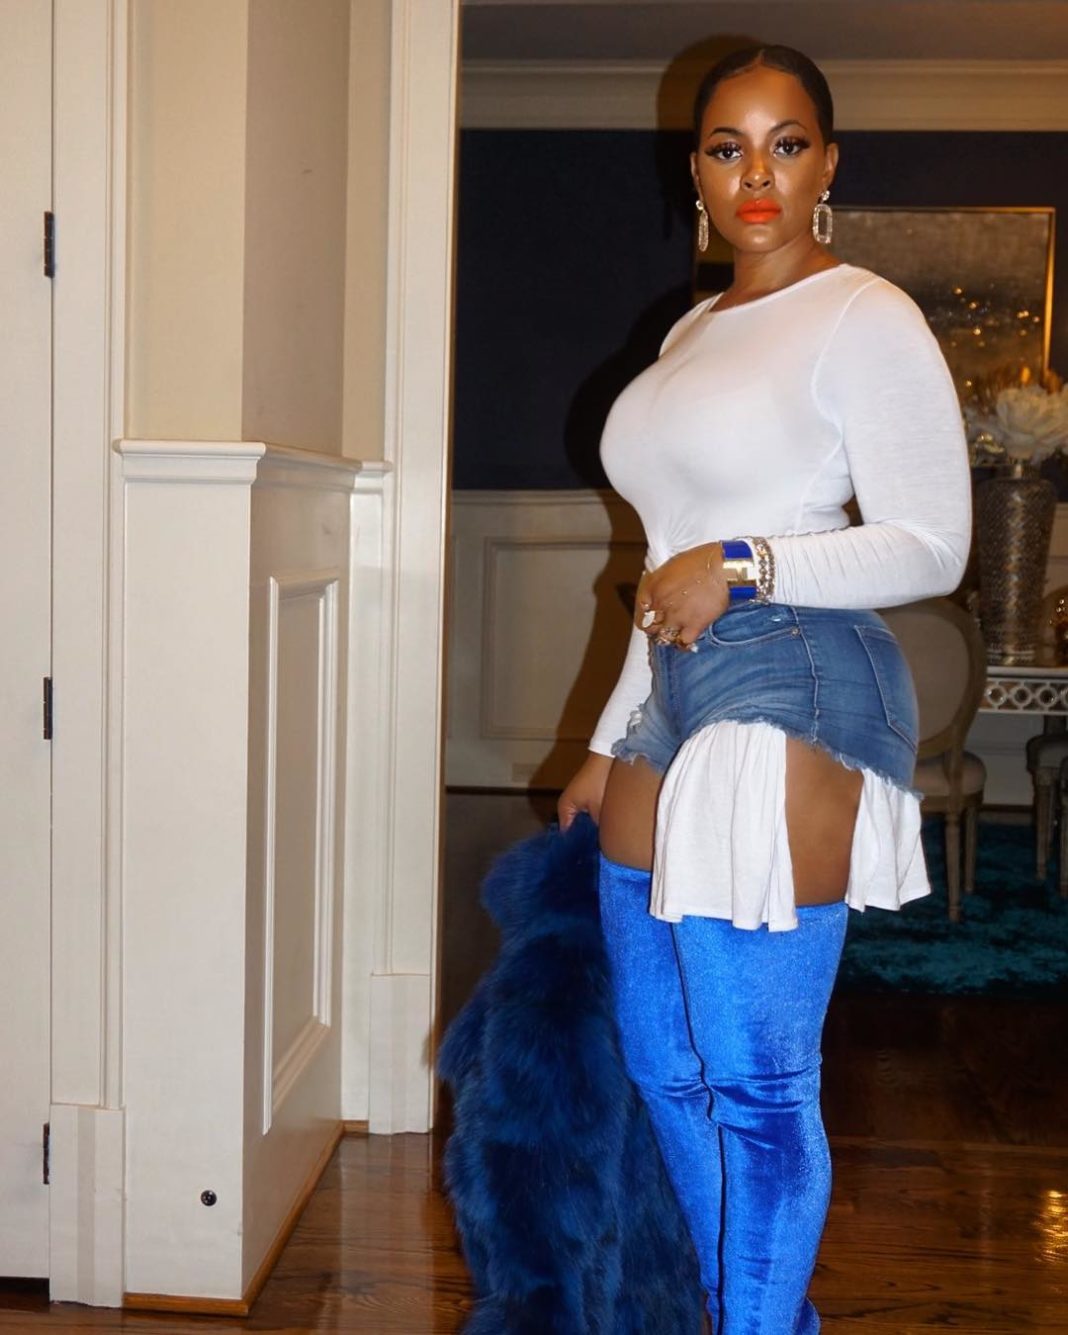 This Is All Wrong': Malaysia Pargo’s Casual Trendy Look Gets